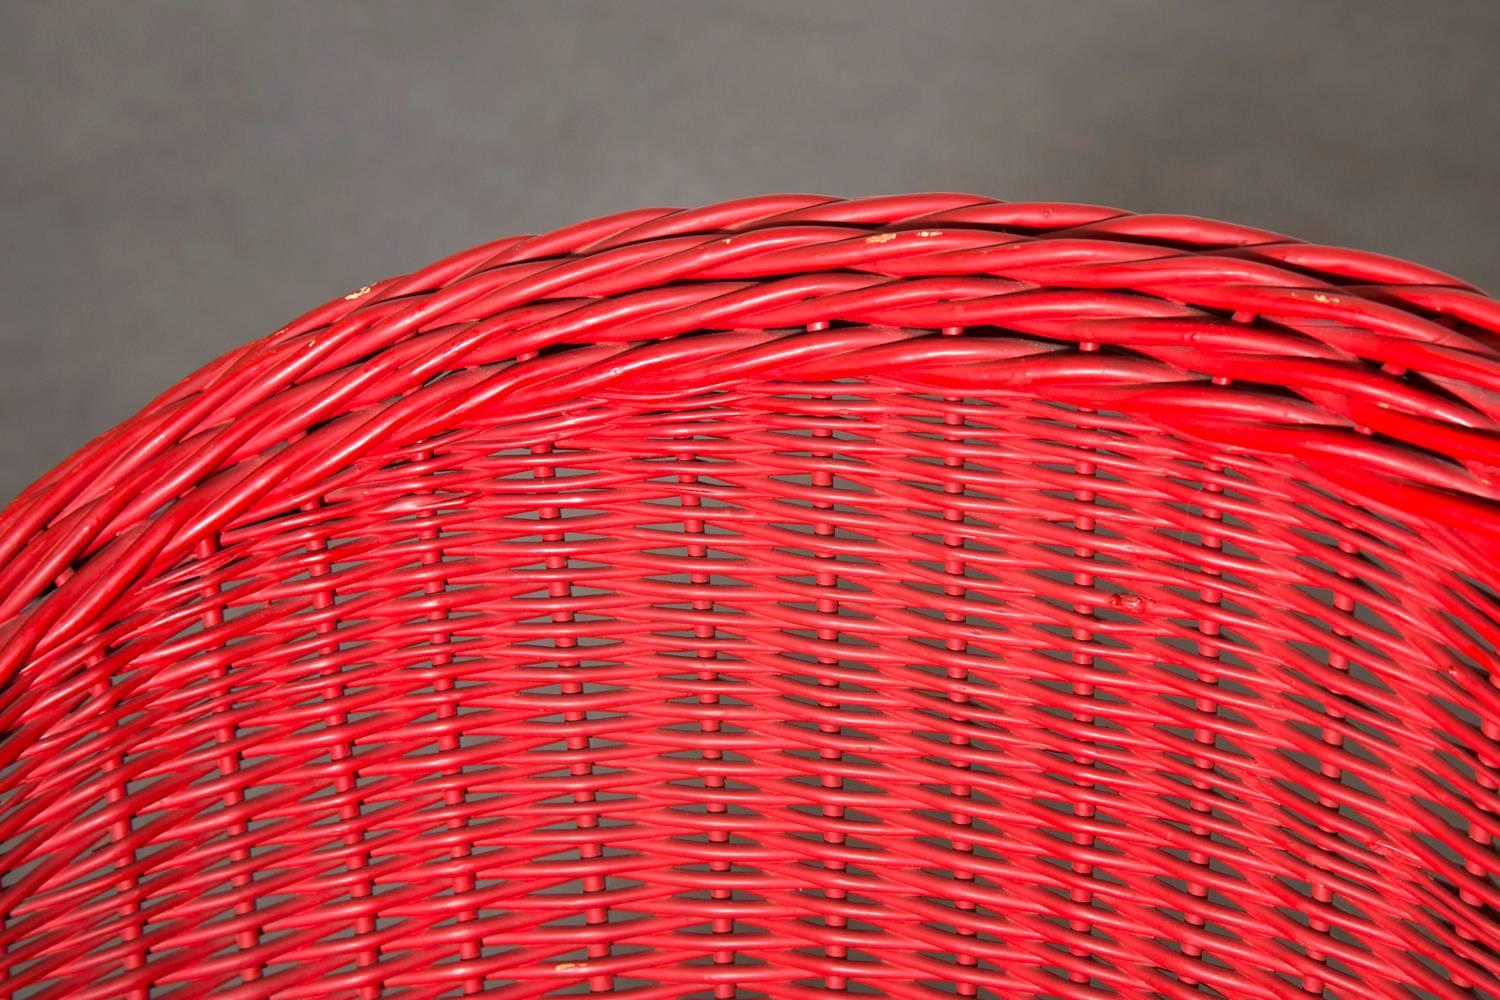 Mid-Century Modern Mid-Century Jacques Adnet Inspired Red Woven Rattan and Wire Hoop Chair For Sale